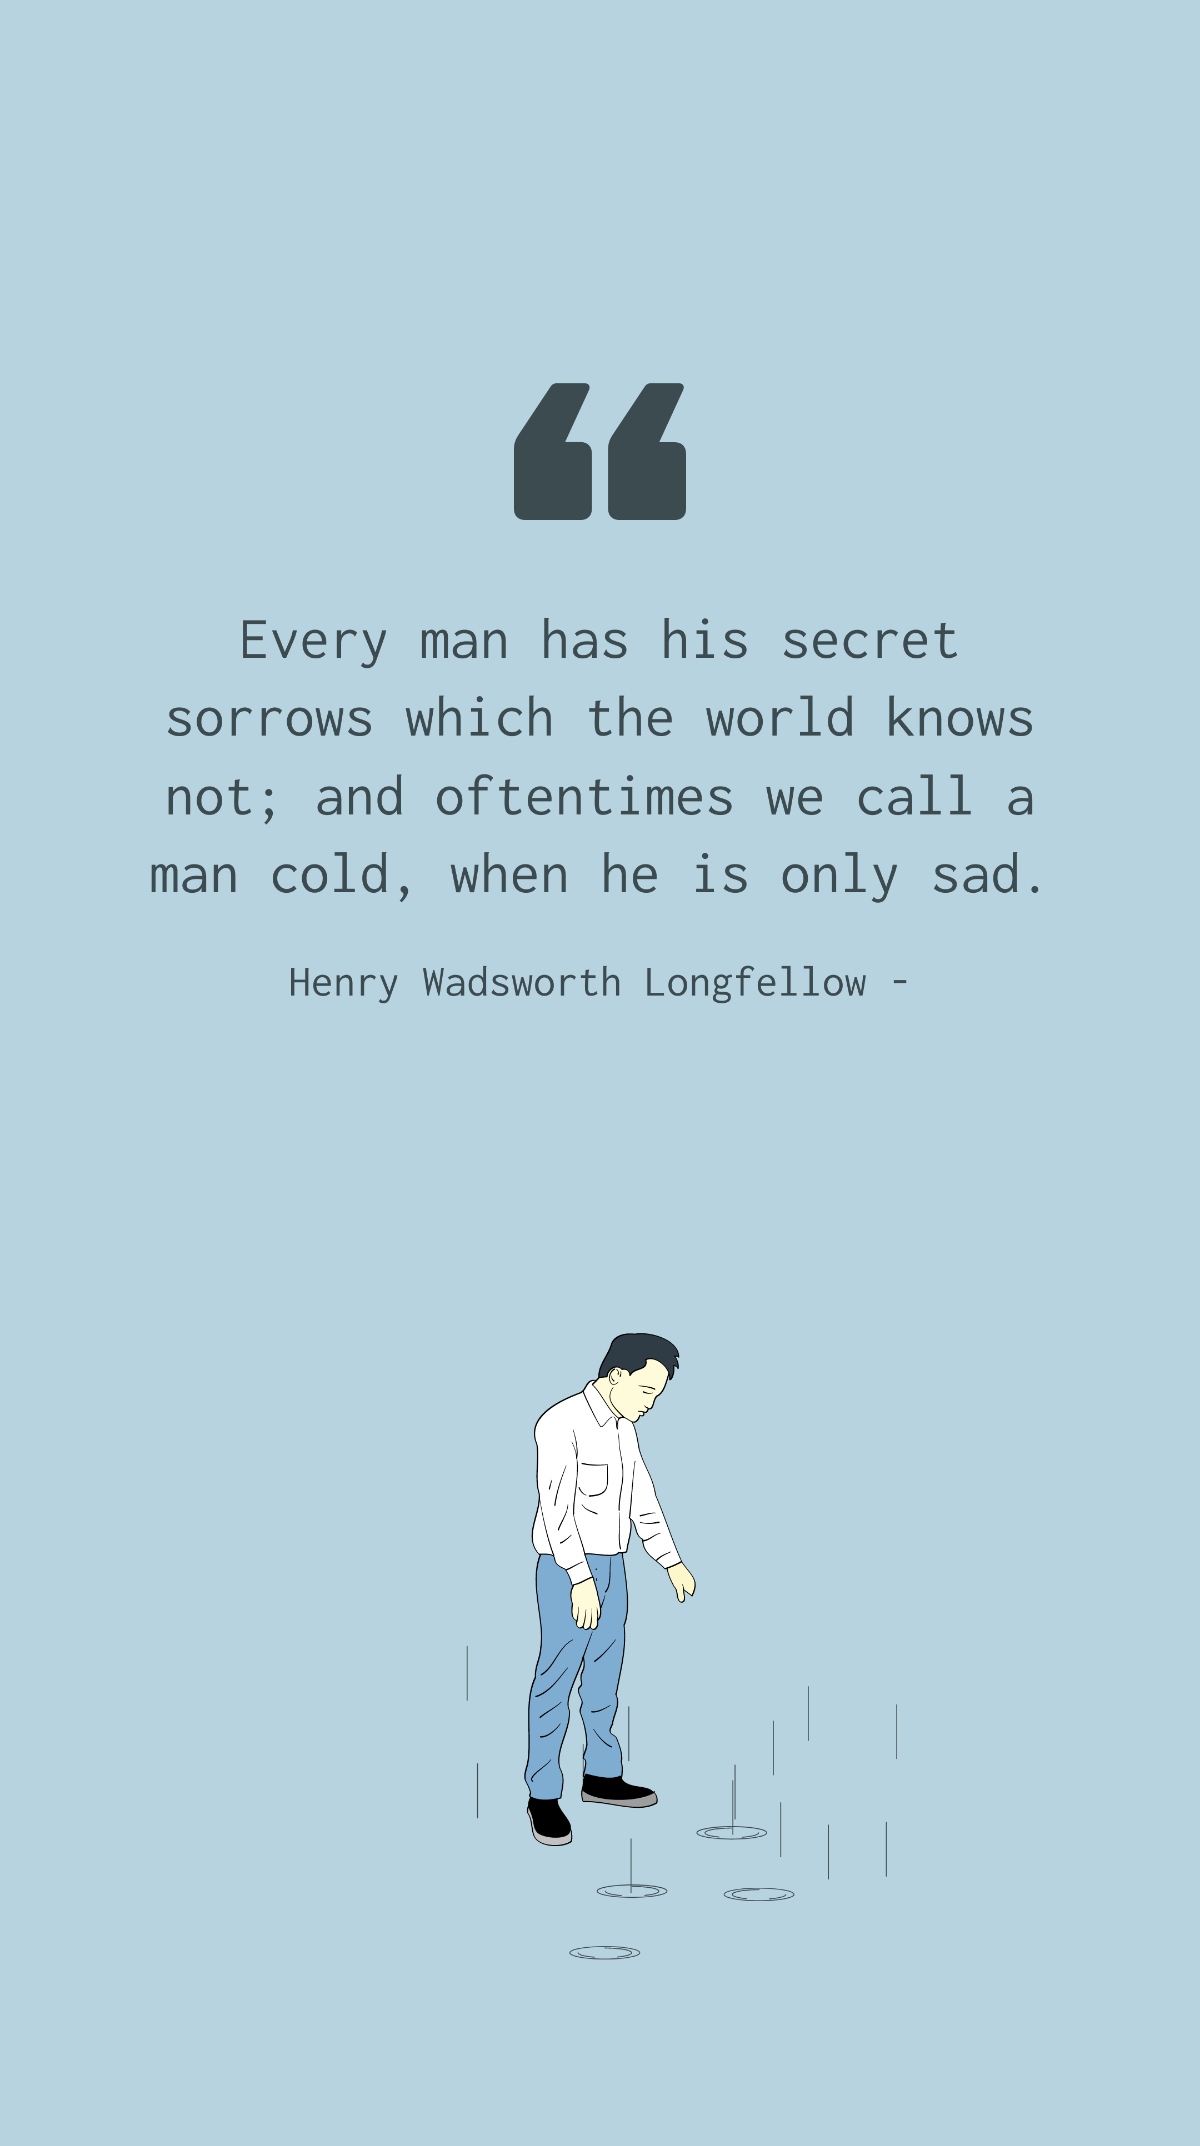 Henry Wadsworth Longfellow - Every man has his secret sorrows which the world knows not; and oftentimes we call a man cold, when he is only sad. Template